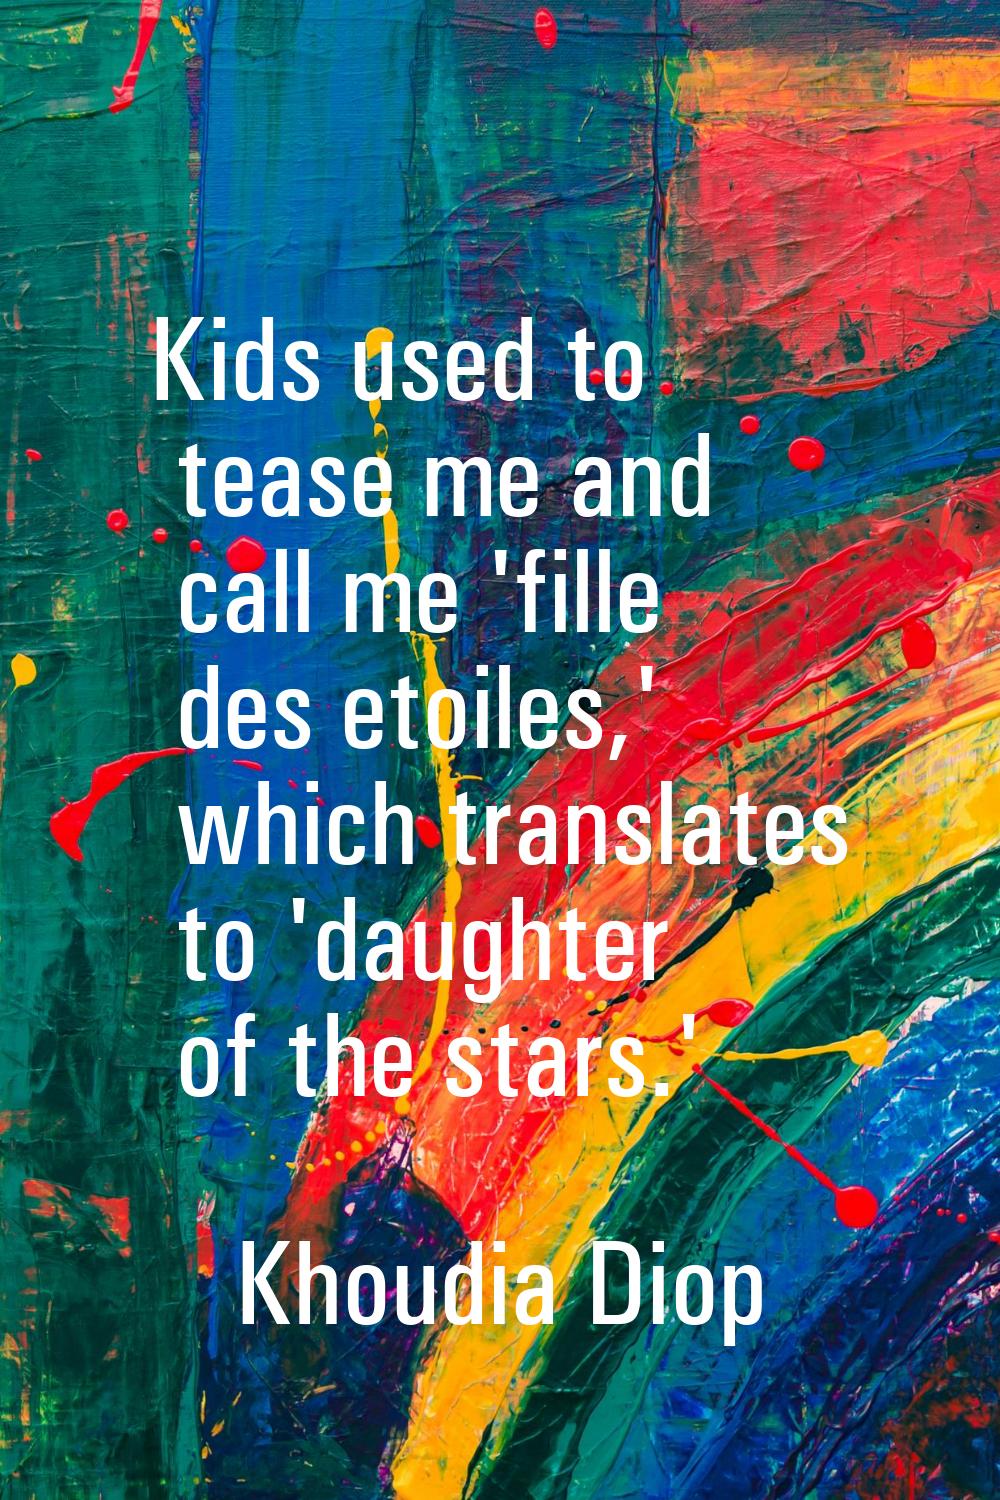 Kids used to tease me and call me 'fille des etoiles,' which translates to 'daughter of the stars.'